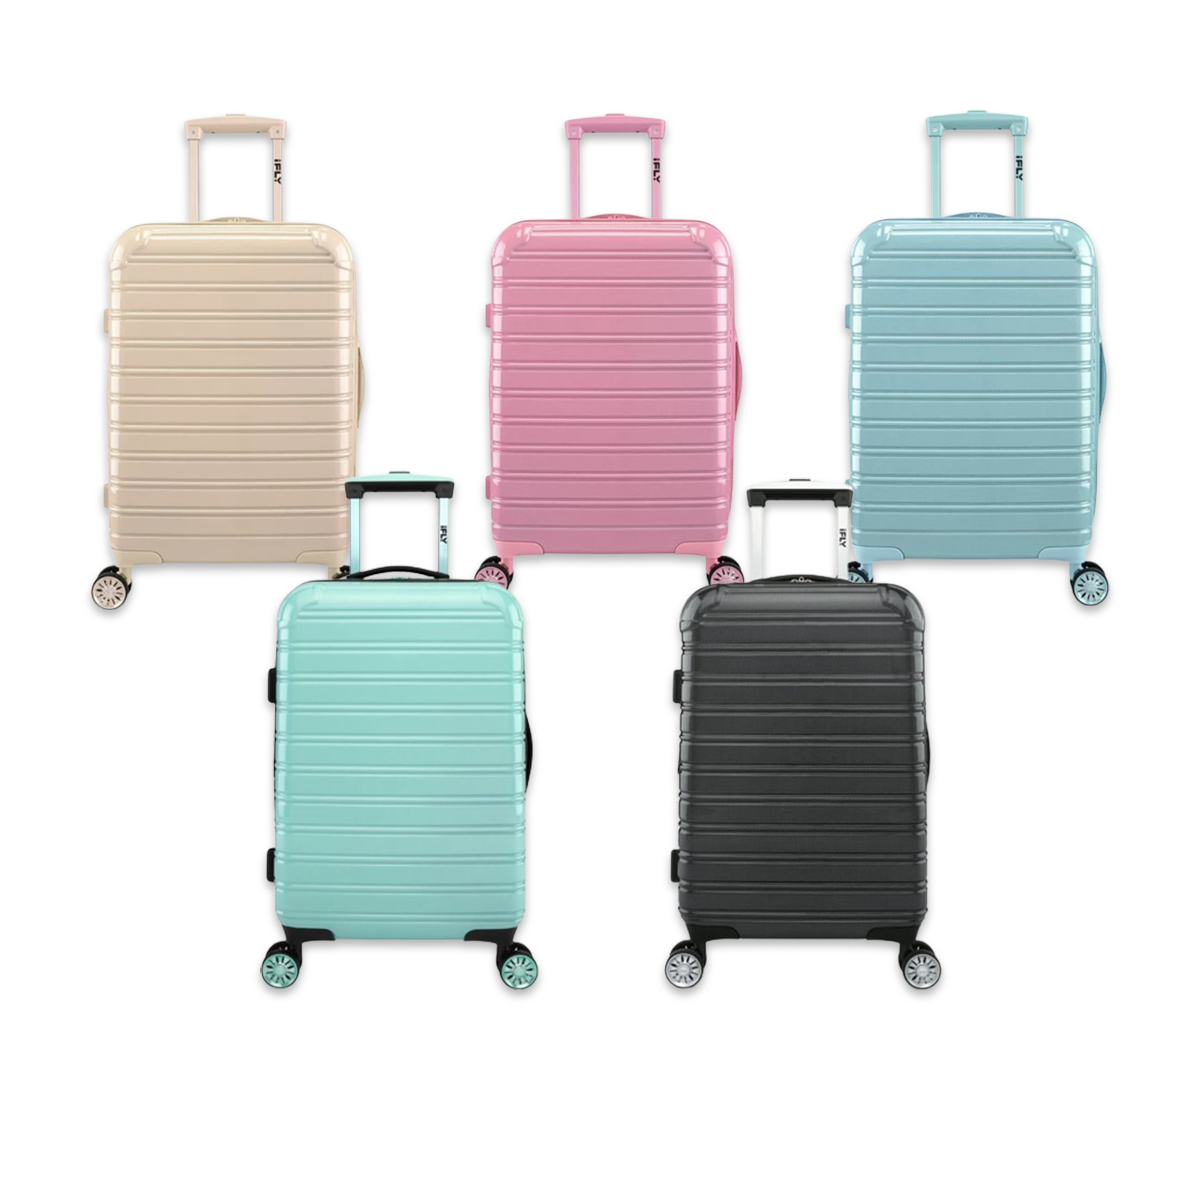 This $89 Walmart Suitcase With 14,900+ 5-Star Reviews Proves That Affordable Luggage Can Be Reliable – E! Online